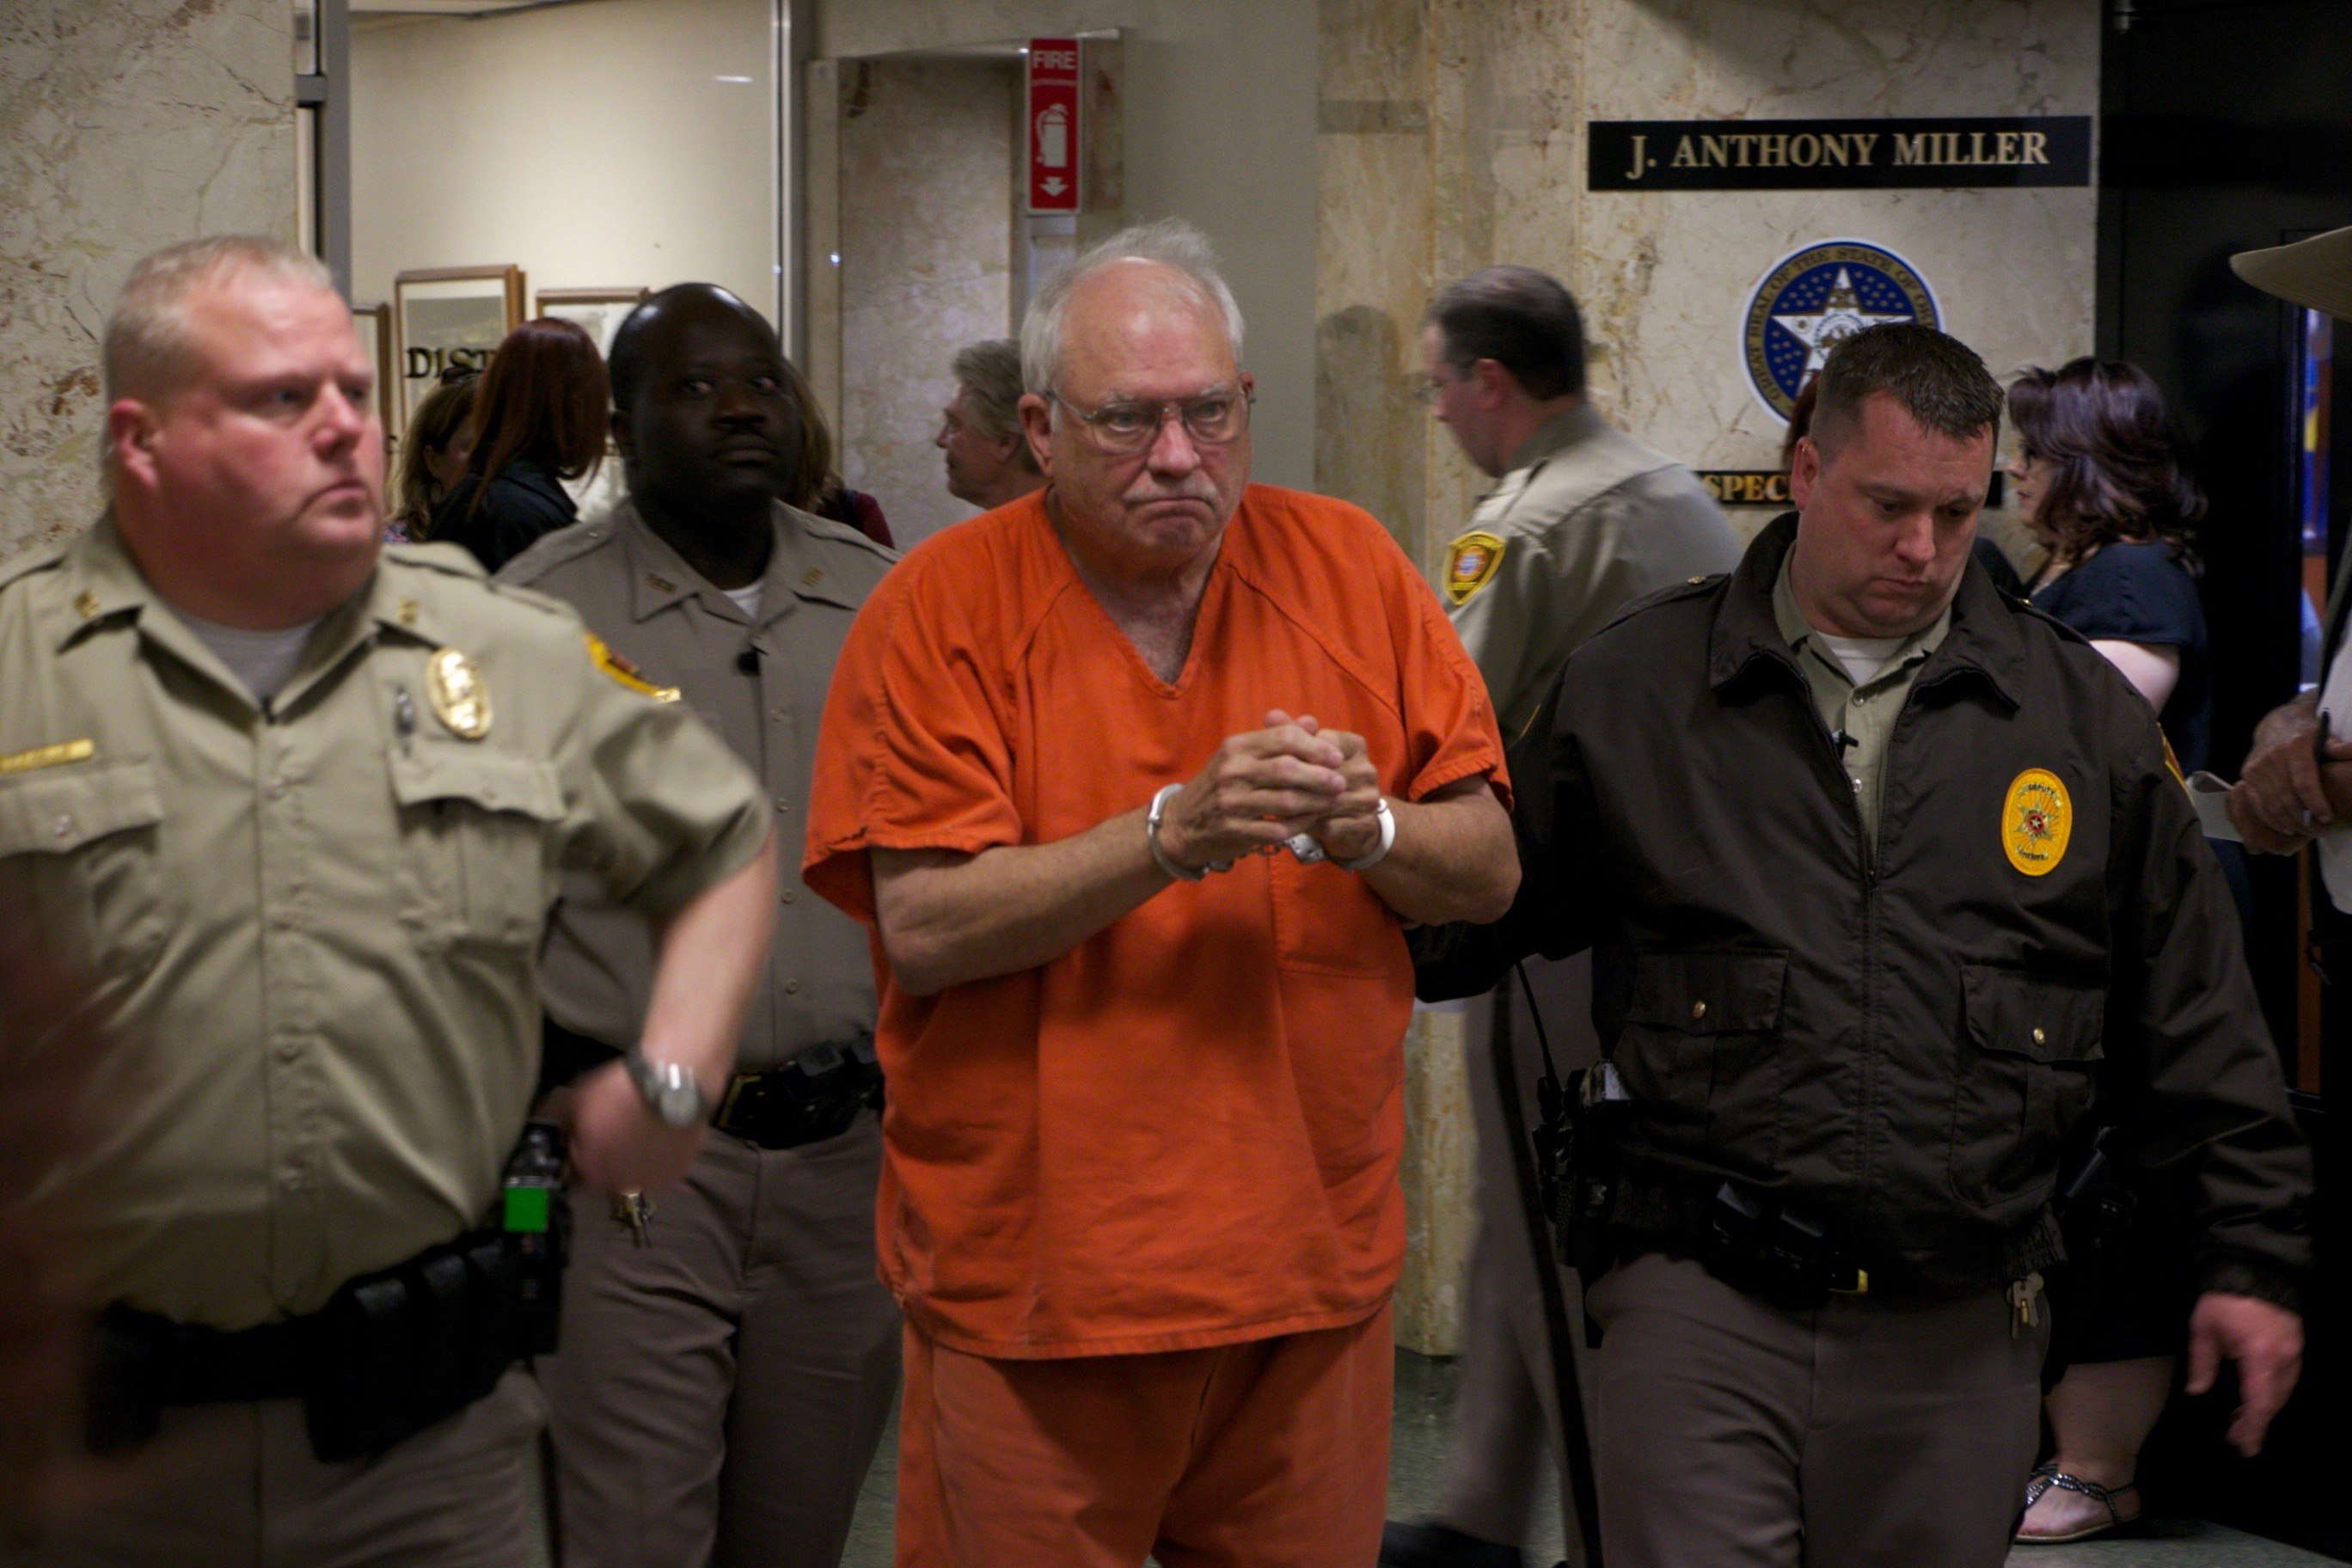 Former reserve deputy who shot unarmed man released early from prison